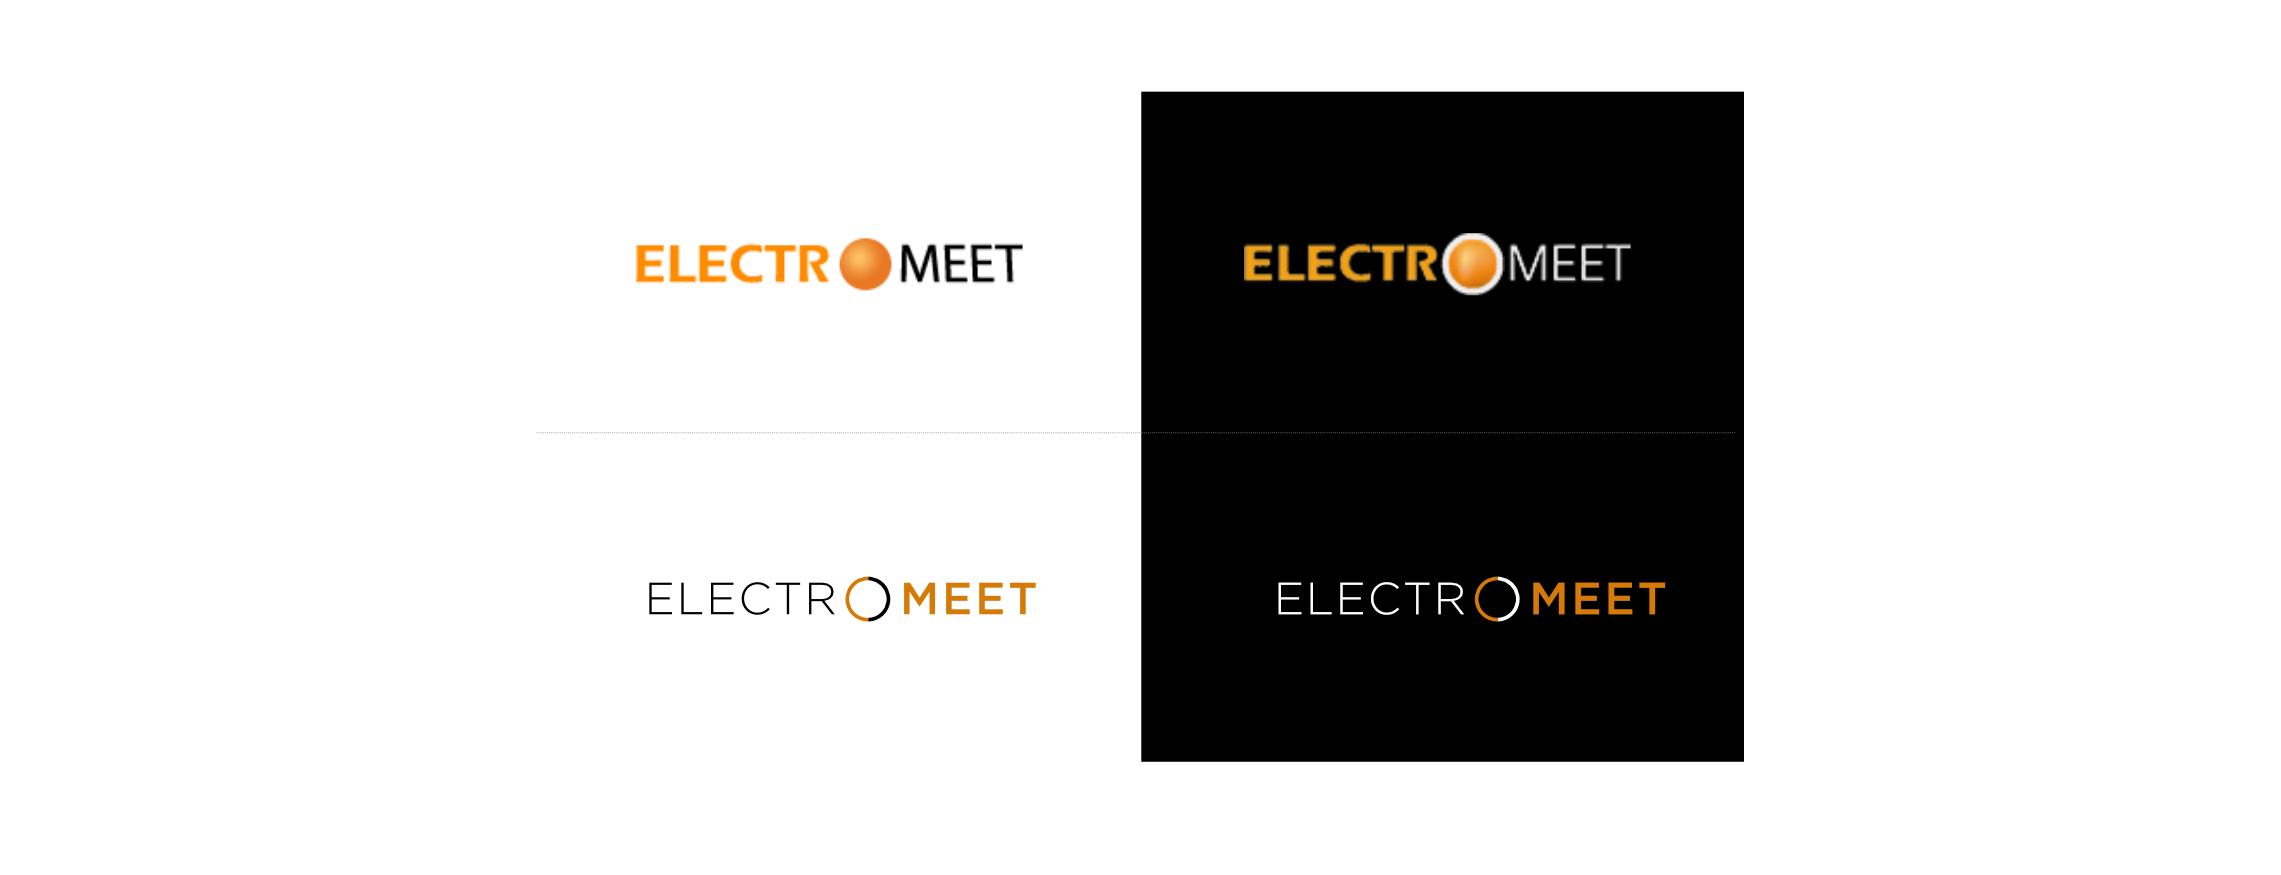 Old and new Electromeet logo, design by Charlotte Clark